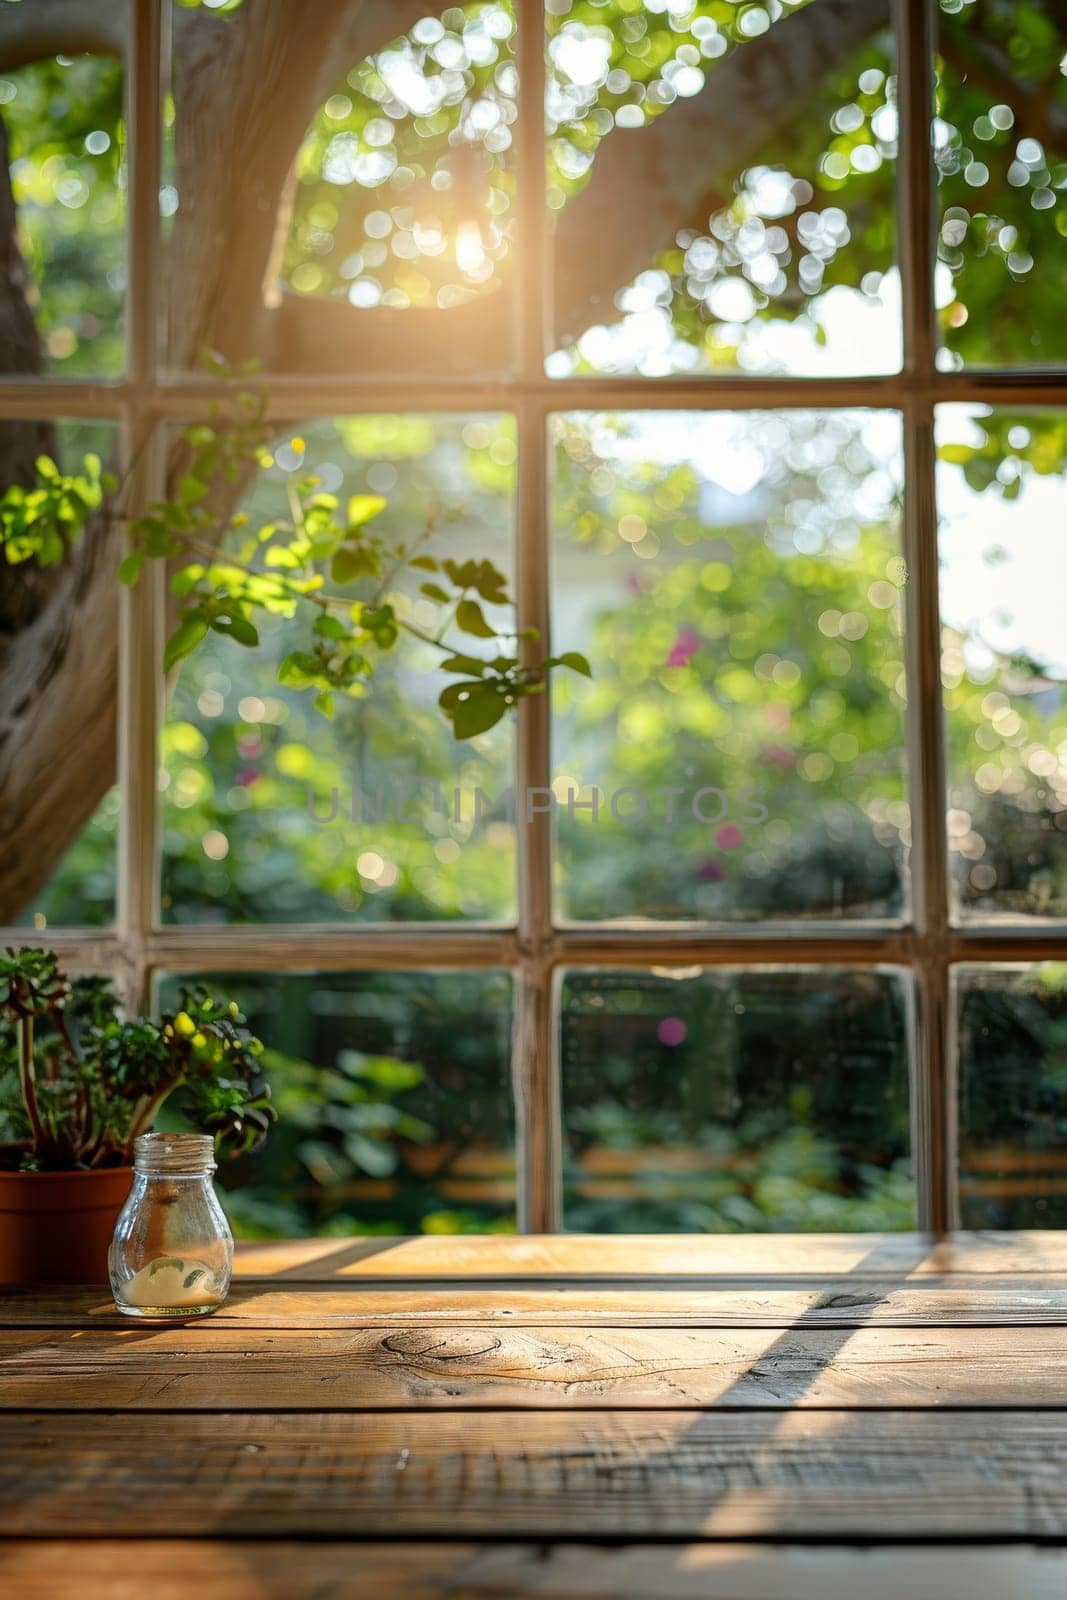 A window with a potted plant sitting on a wooden table. The sunlight is shining through the window, creating a warm and inviting atmosphere